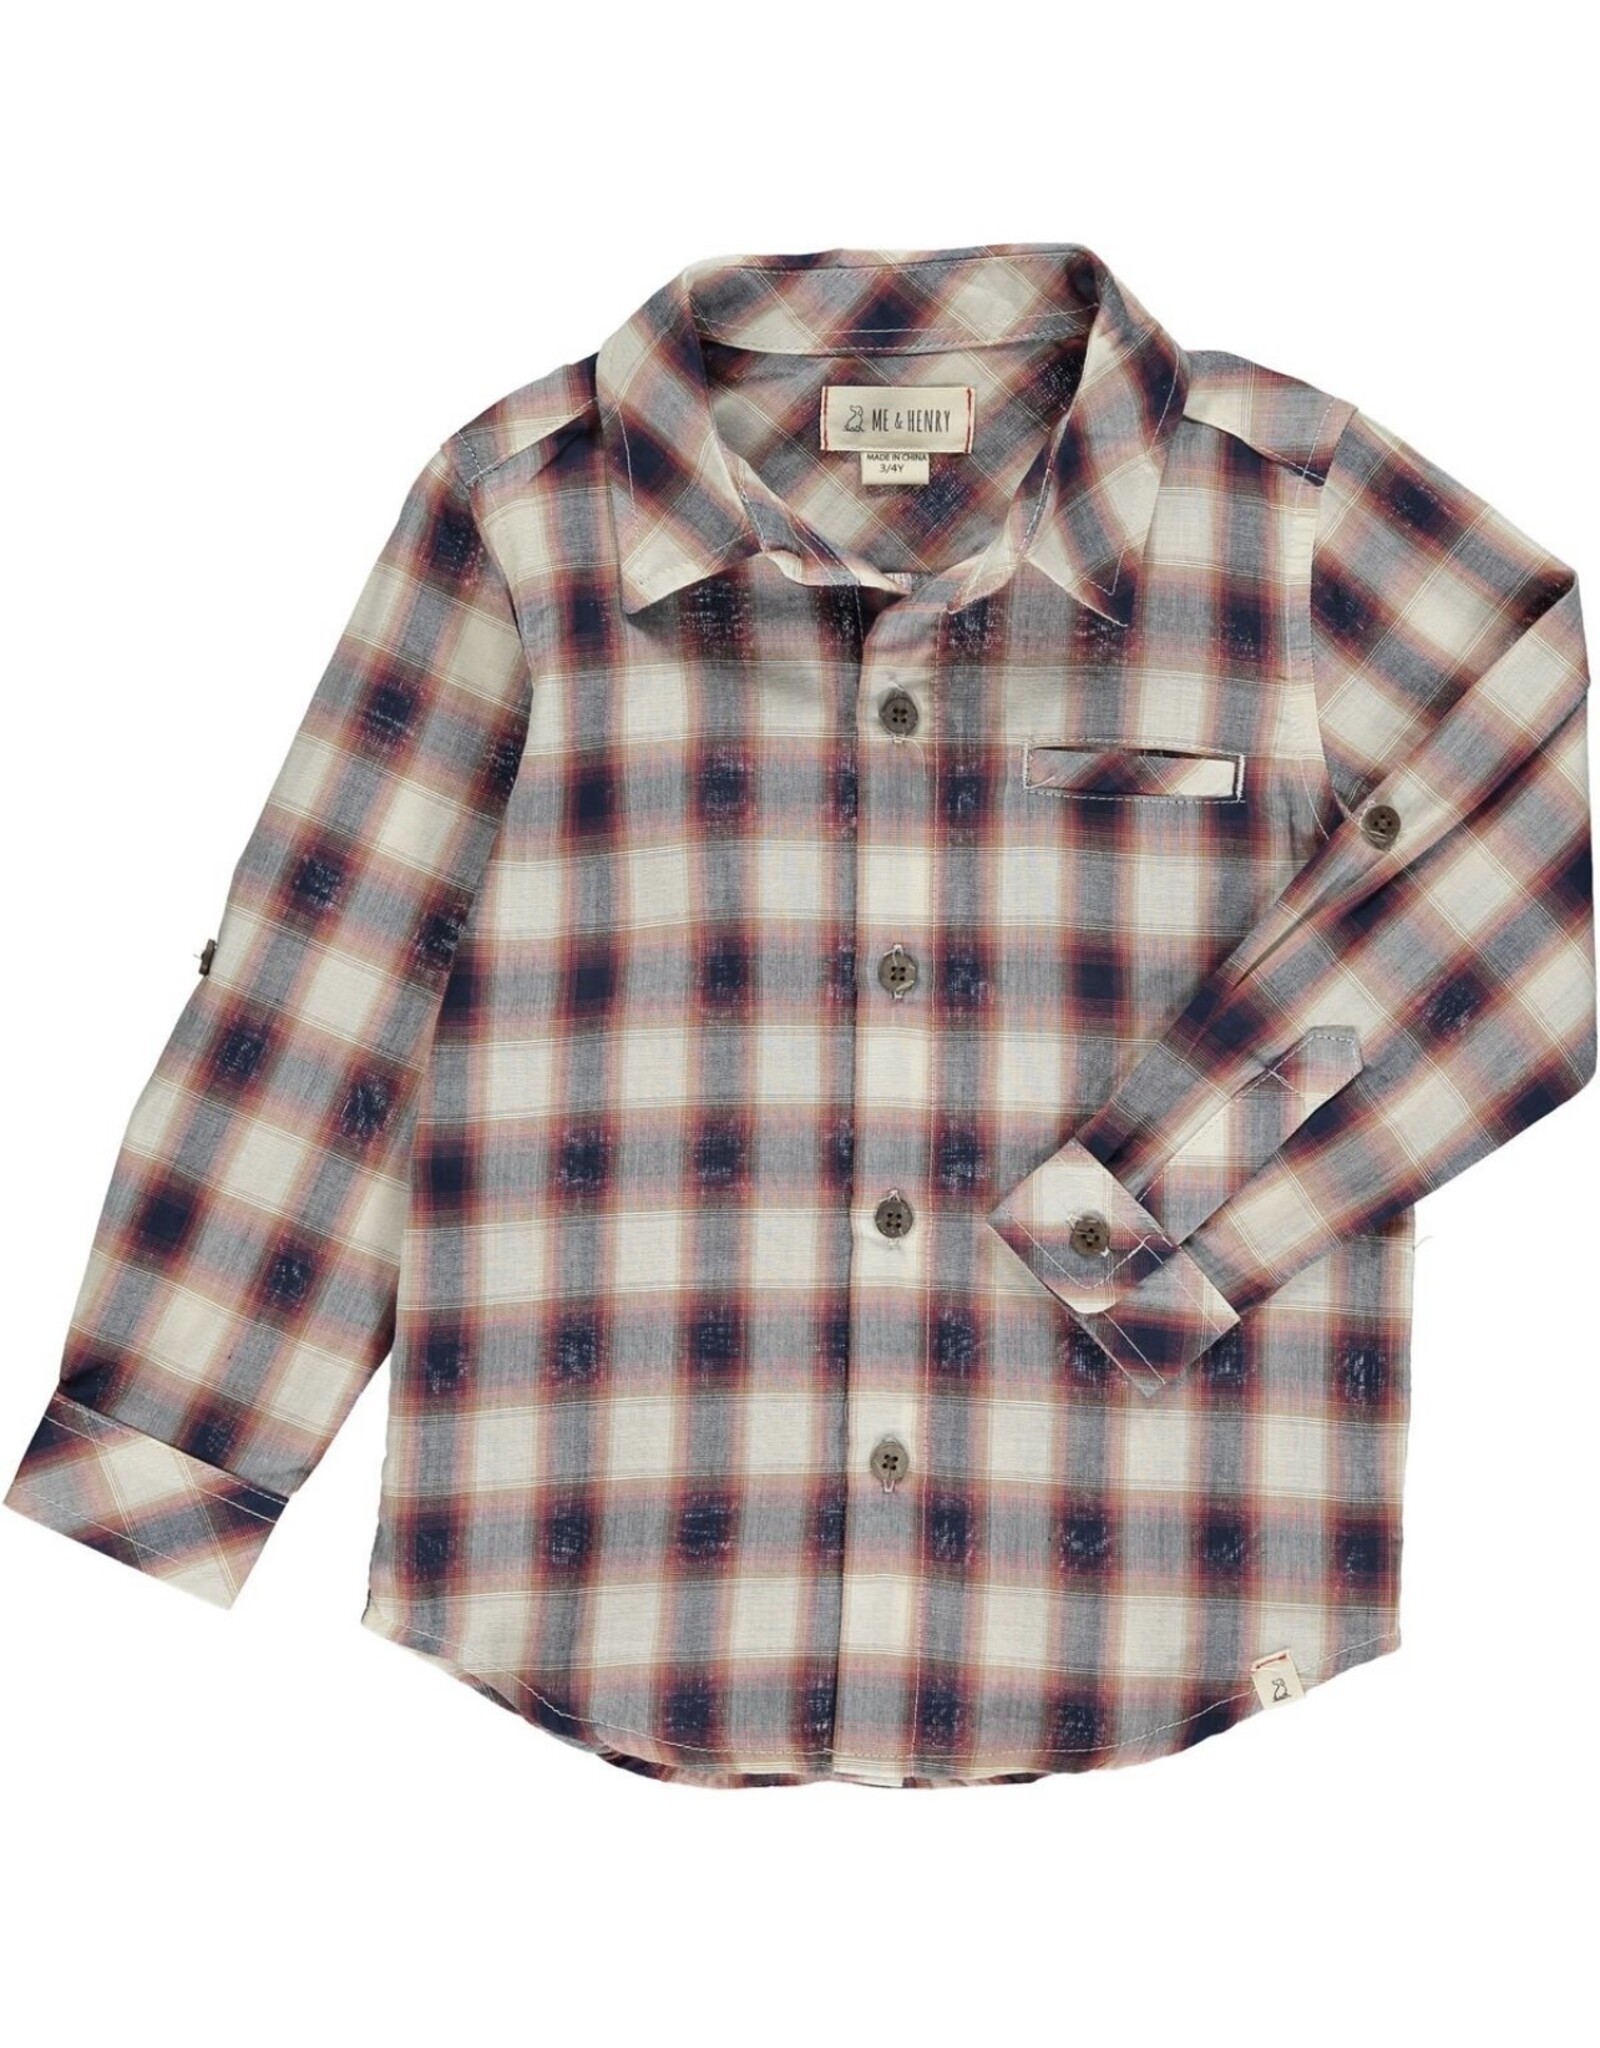 Me & Henry Me & Henry- Atwood Woven Shirt: Navy/Red/Cream/Plaid